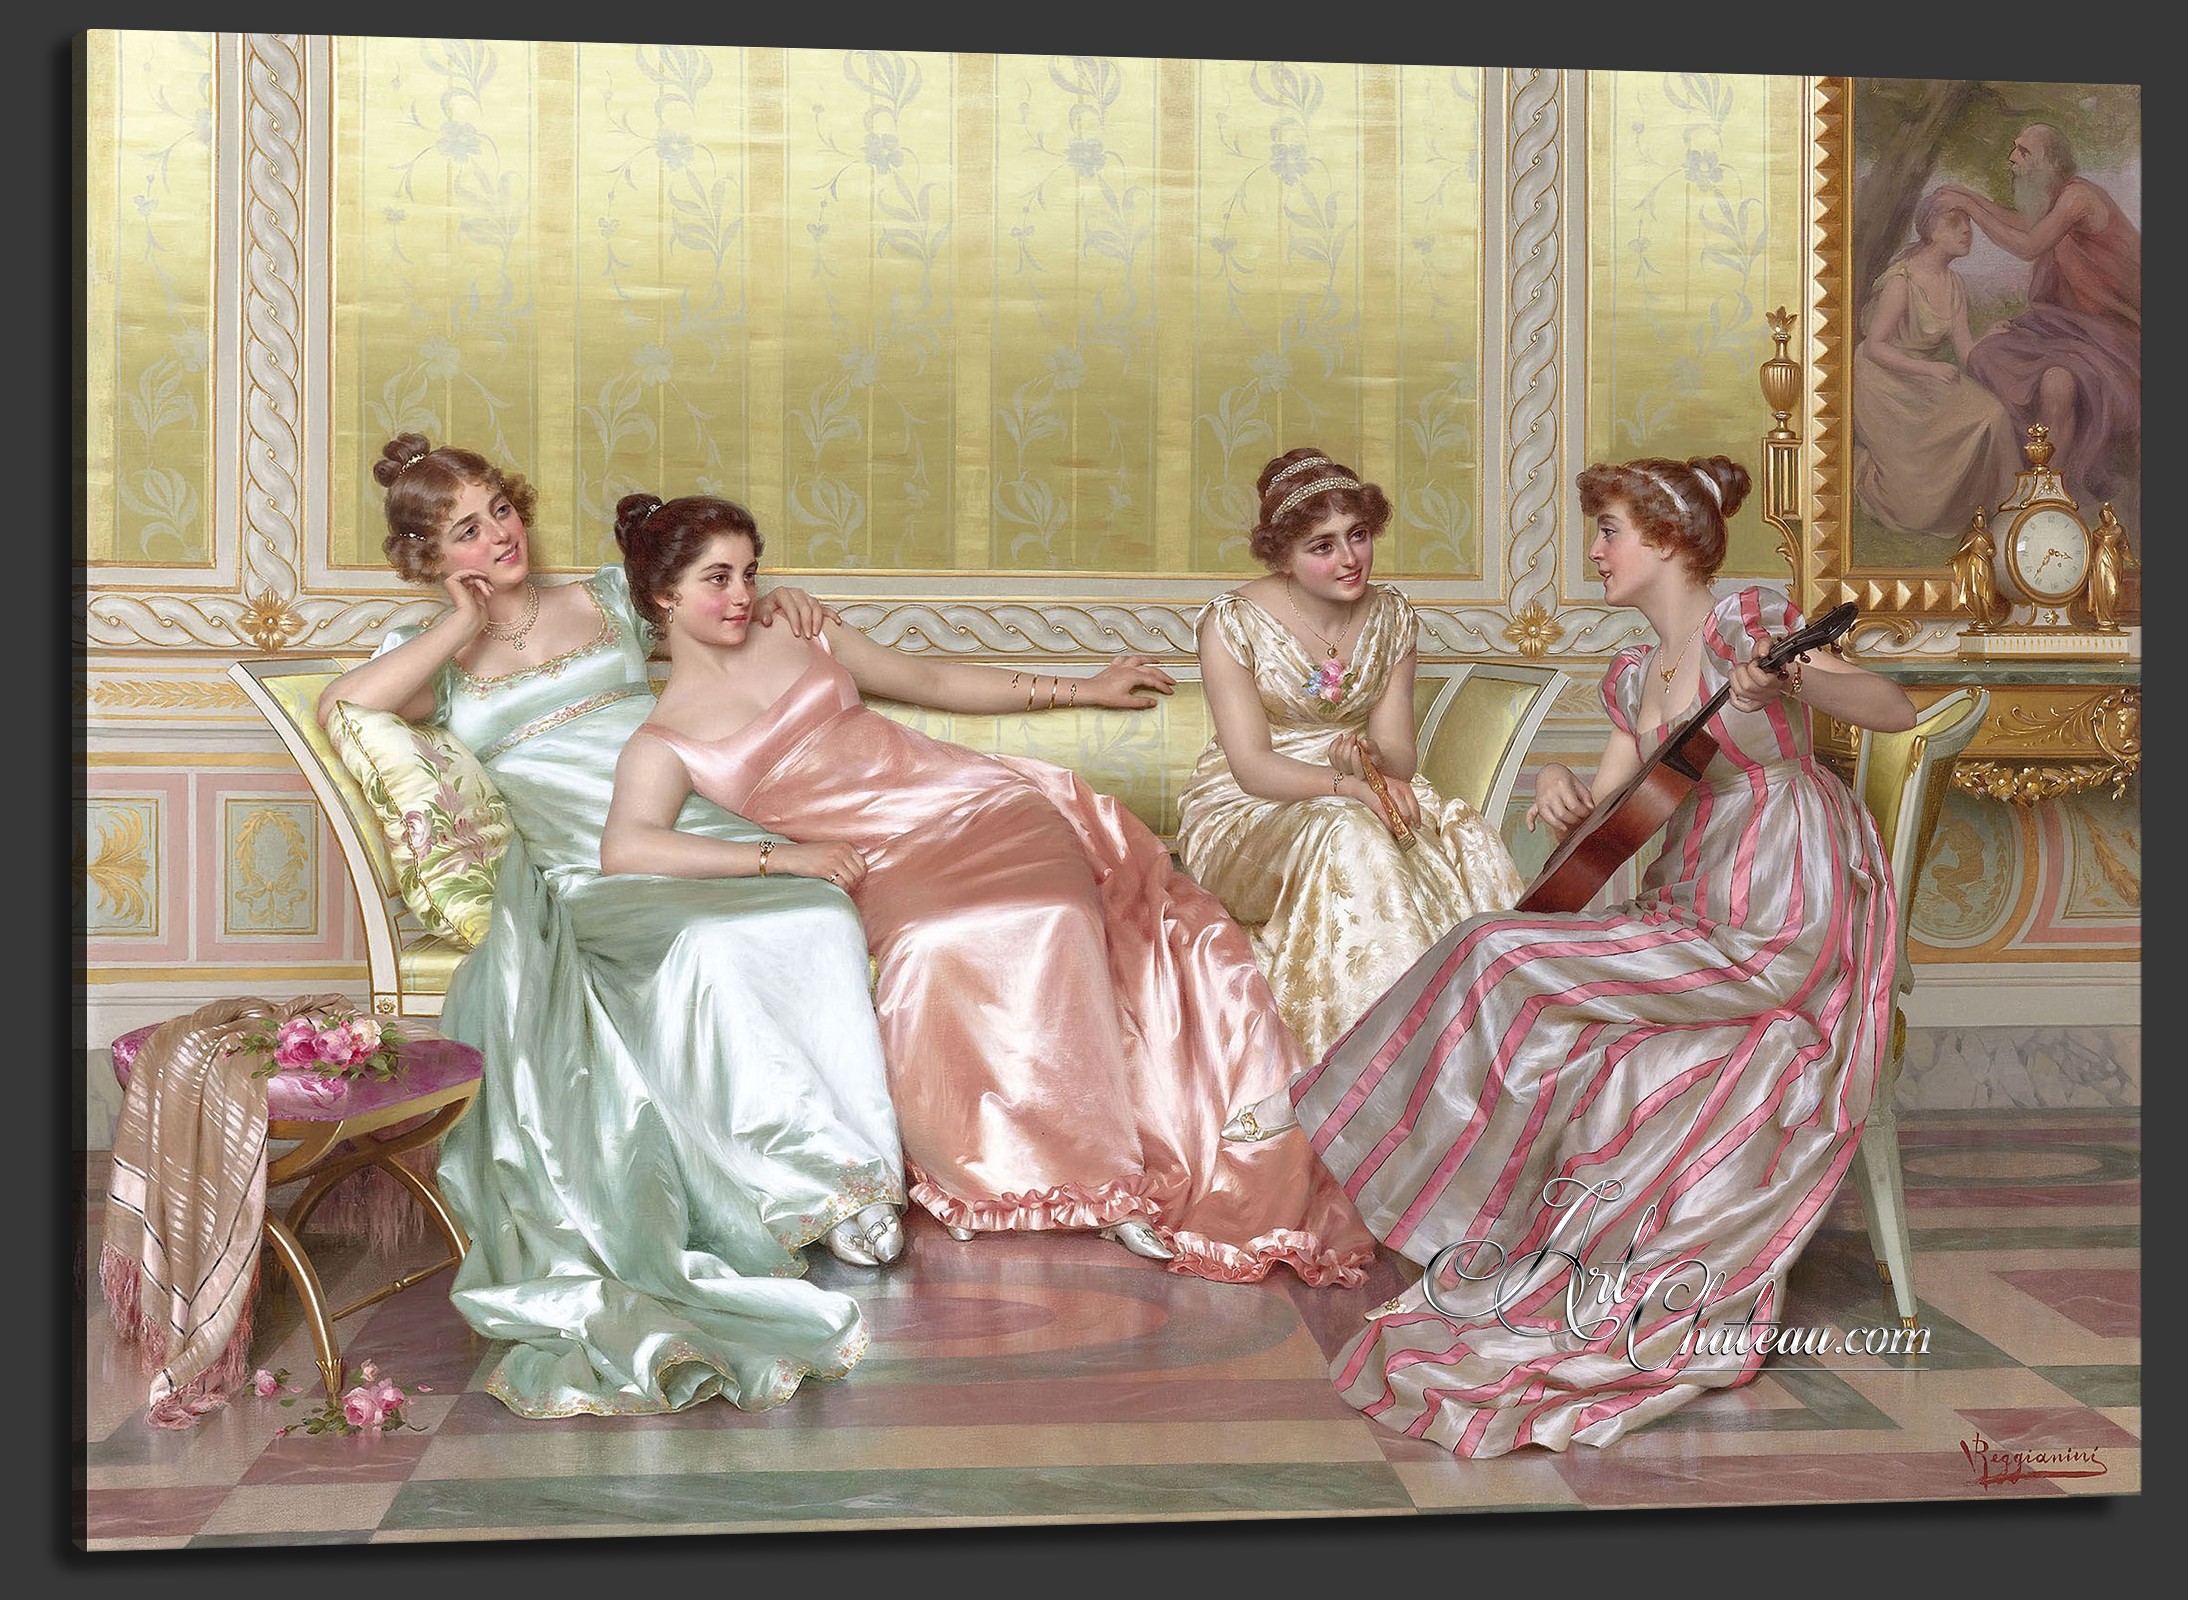 La Soiree, after Painting by Vittorio Reggianini